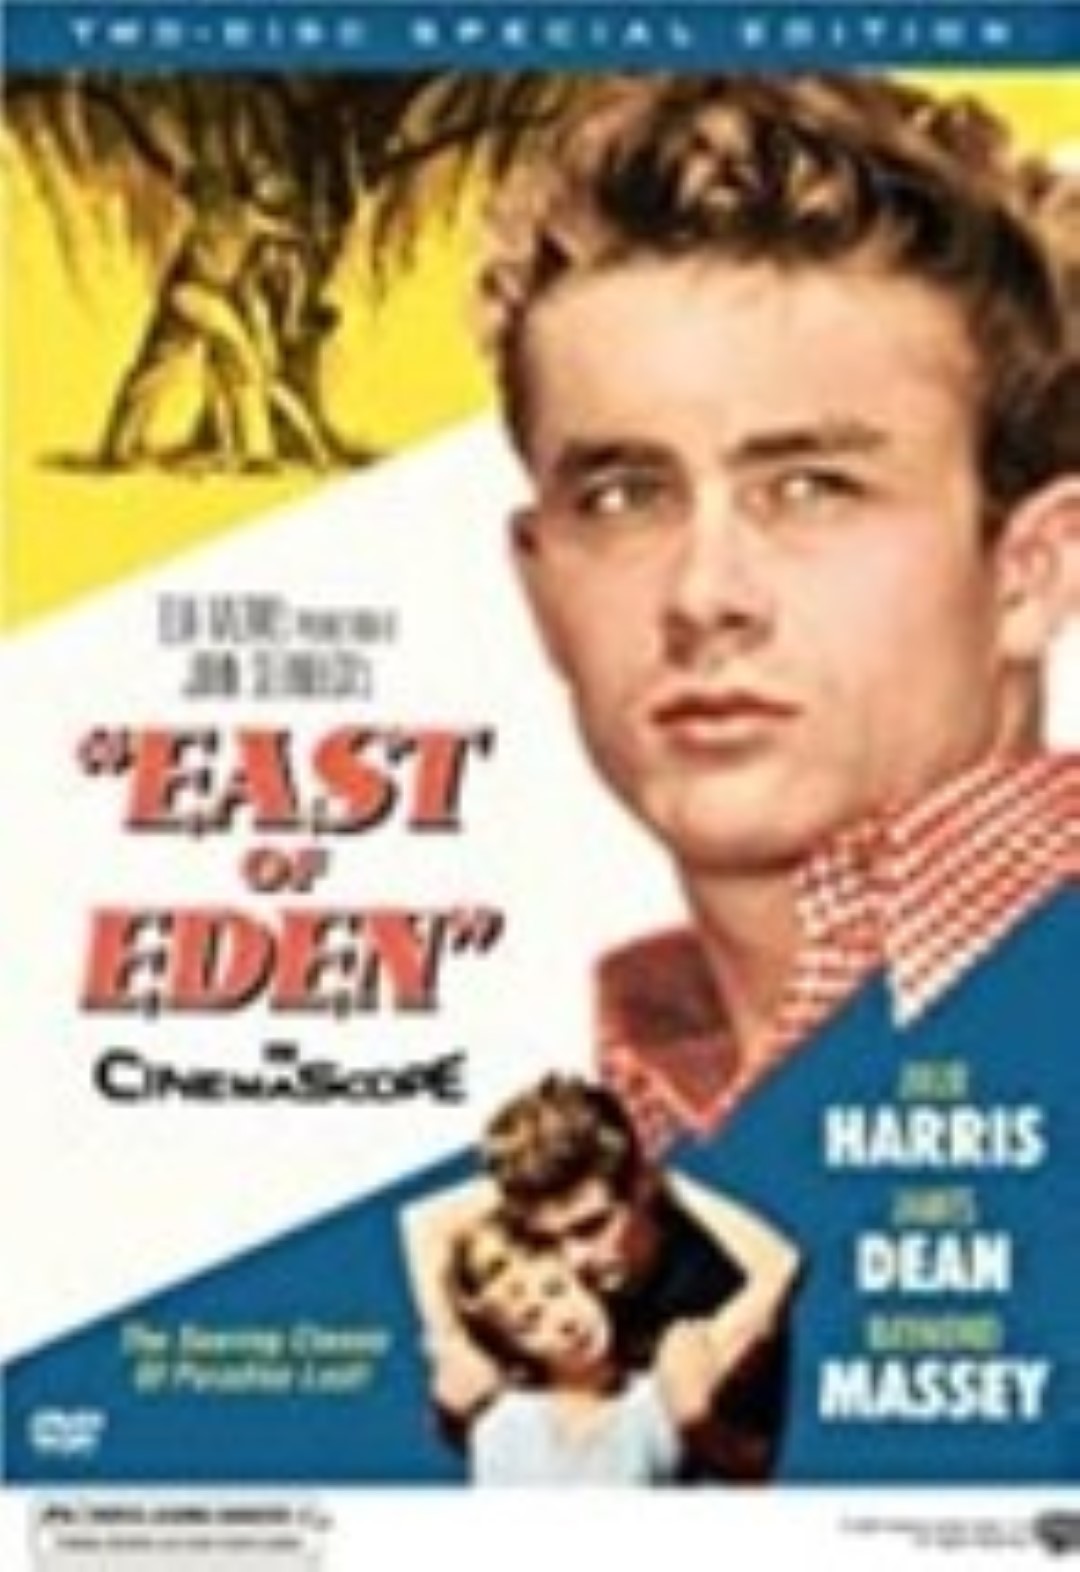 East of eden  two disc special edition  dvd  large 